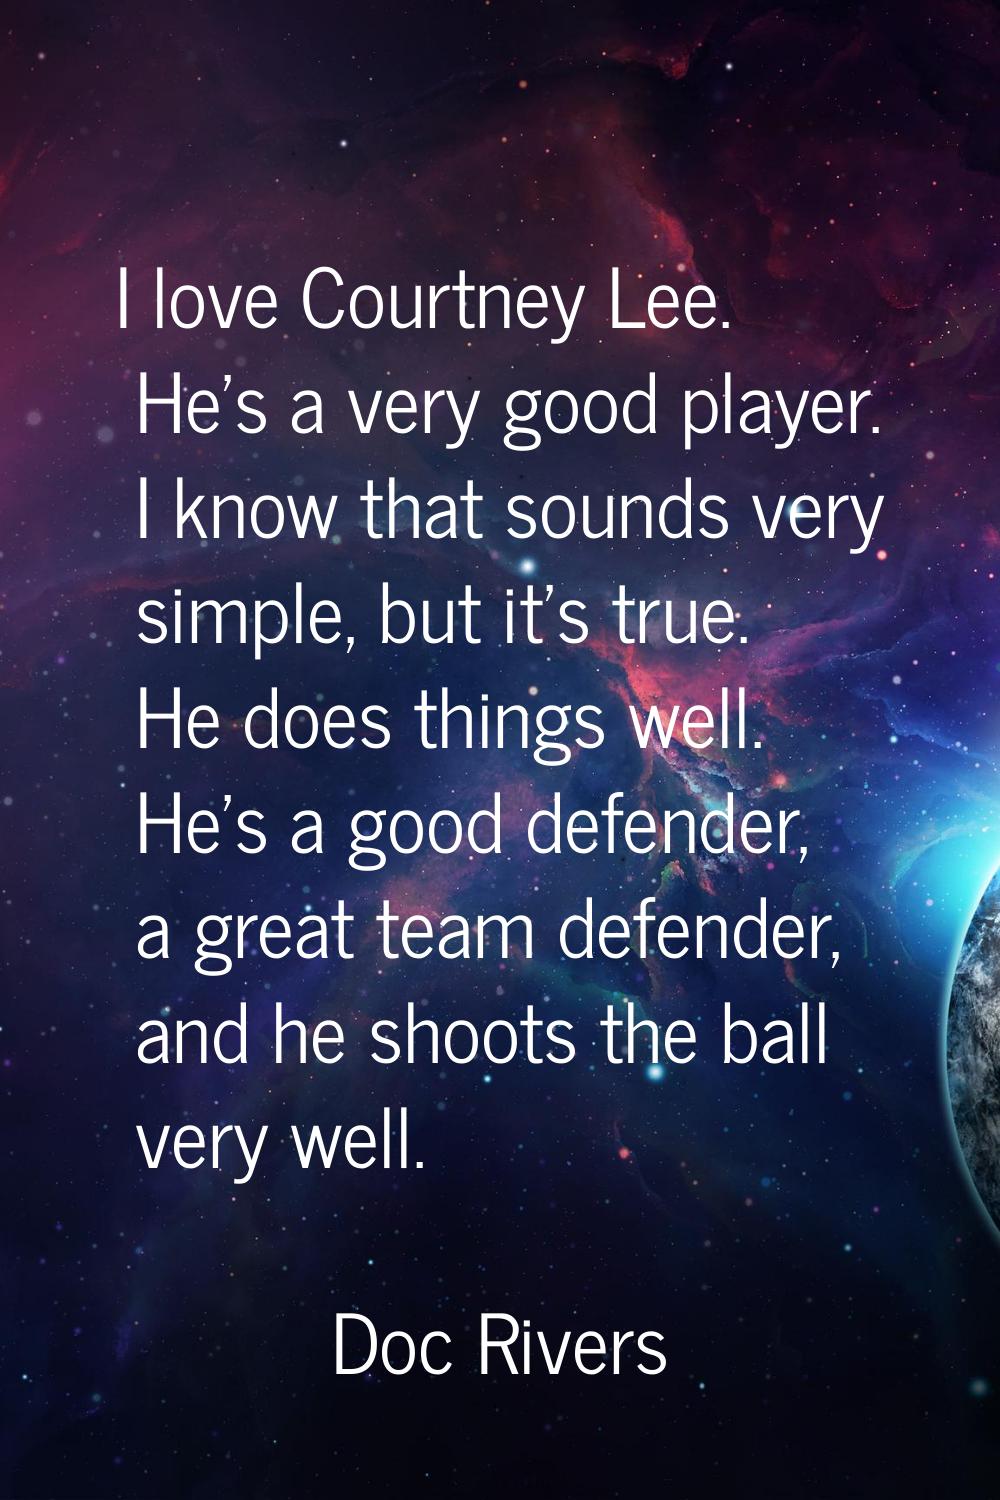 I love Courtney Lee. He's a very good player. I know that sounds very simple, but it's true. He doe